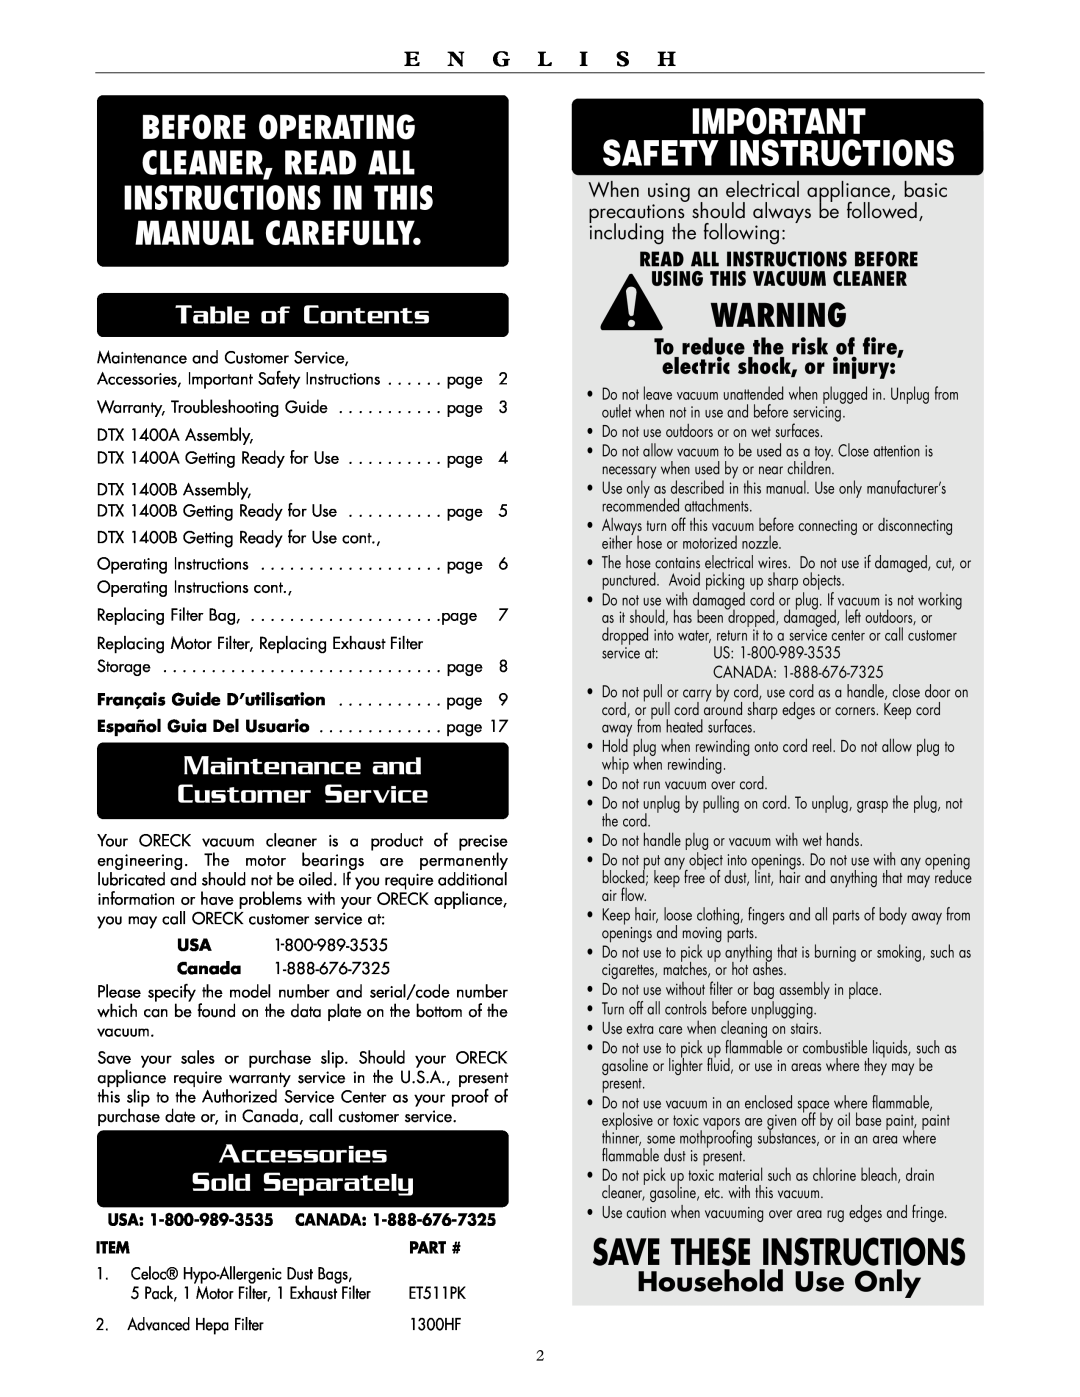 Oreck DTX 1400B Safety Instructions, Save These Instructions, Before Operating, Cleaner, Read All, Manual Carefully 